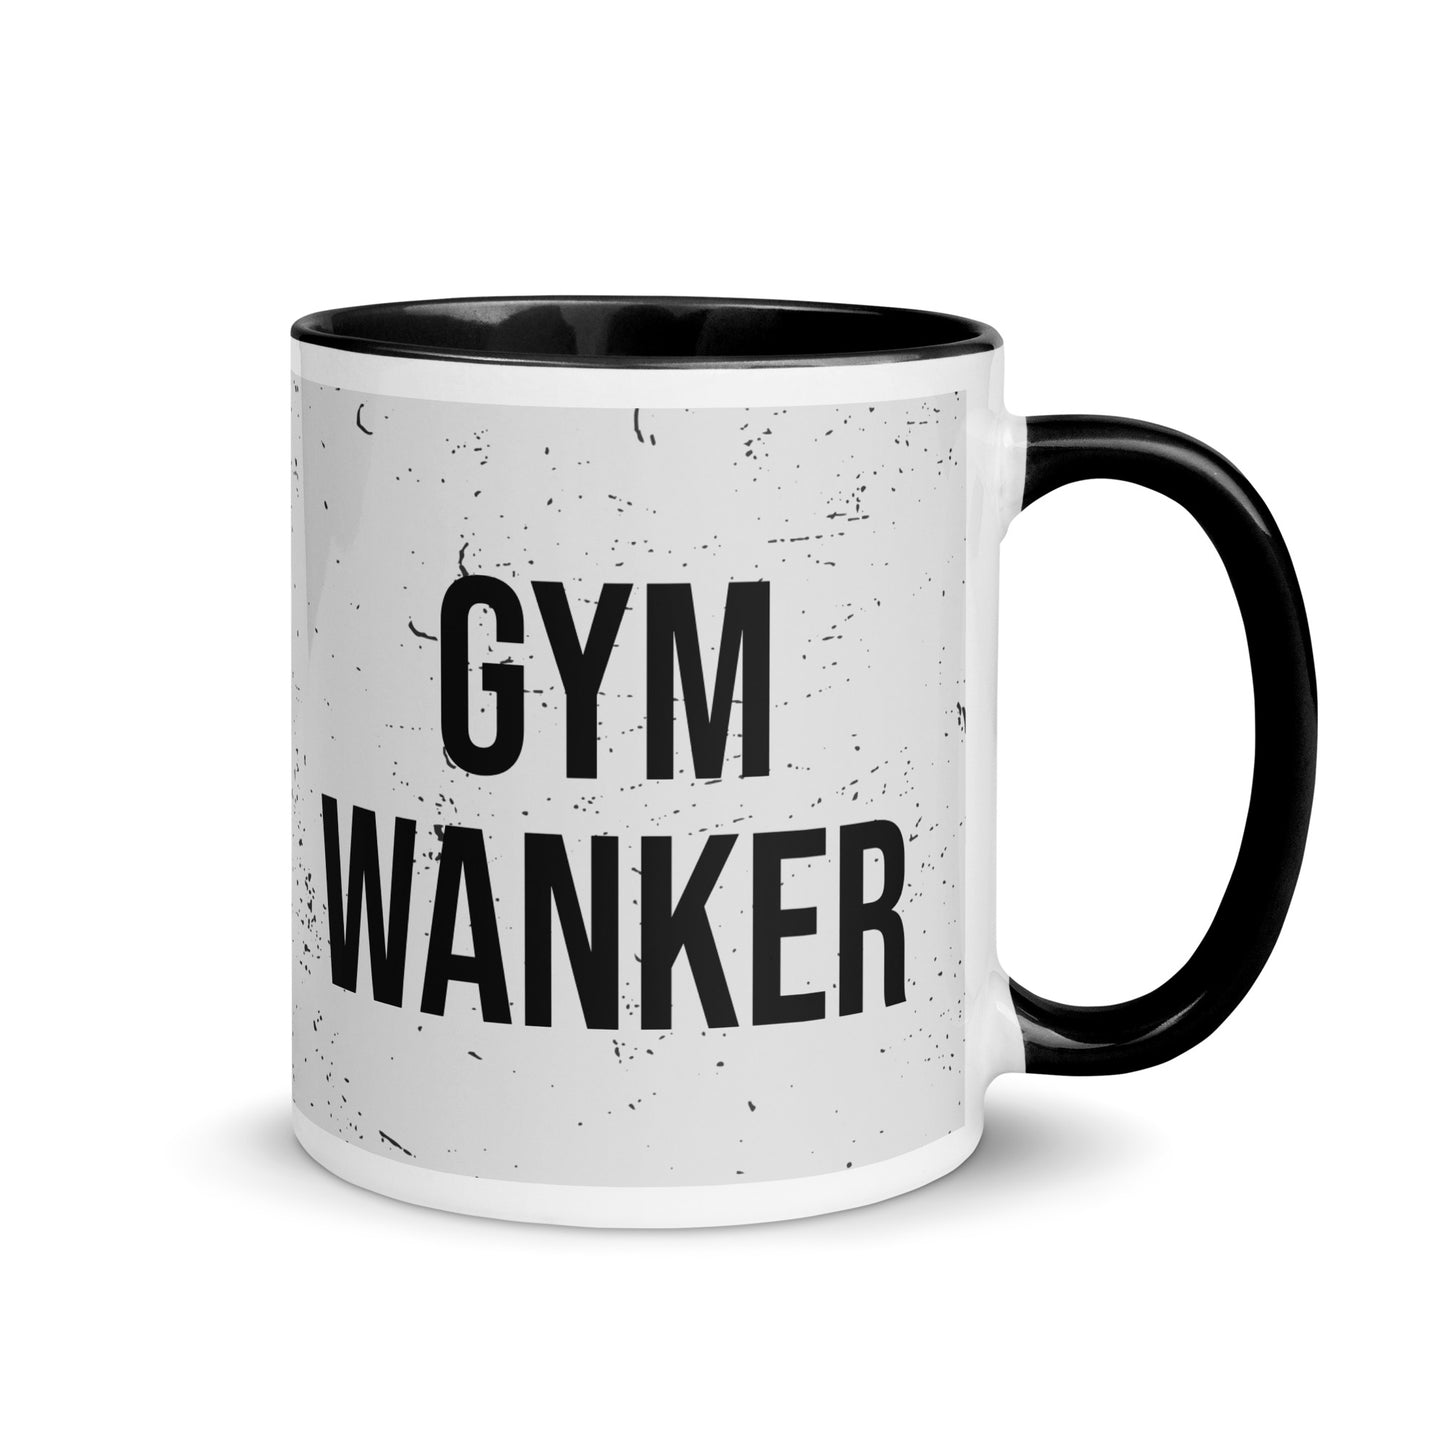 Black handled mug with gym wanker written on it, across a grey splatter background. A gift for someone who loves the gym.